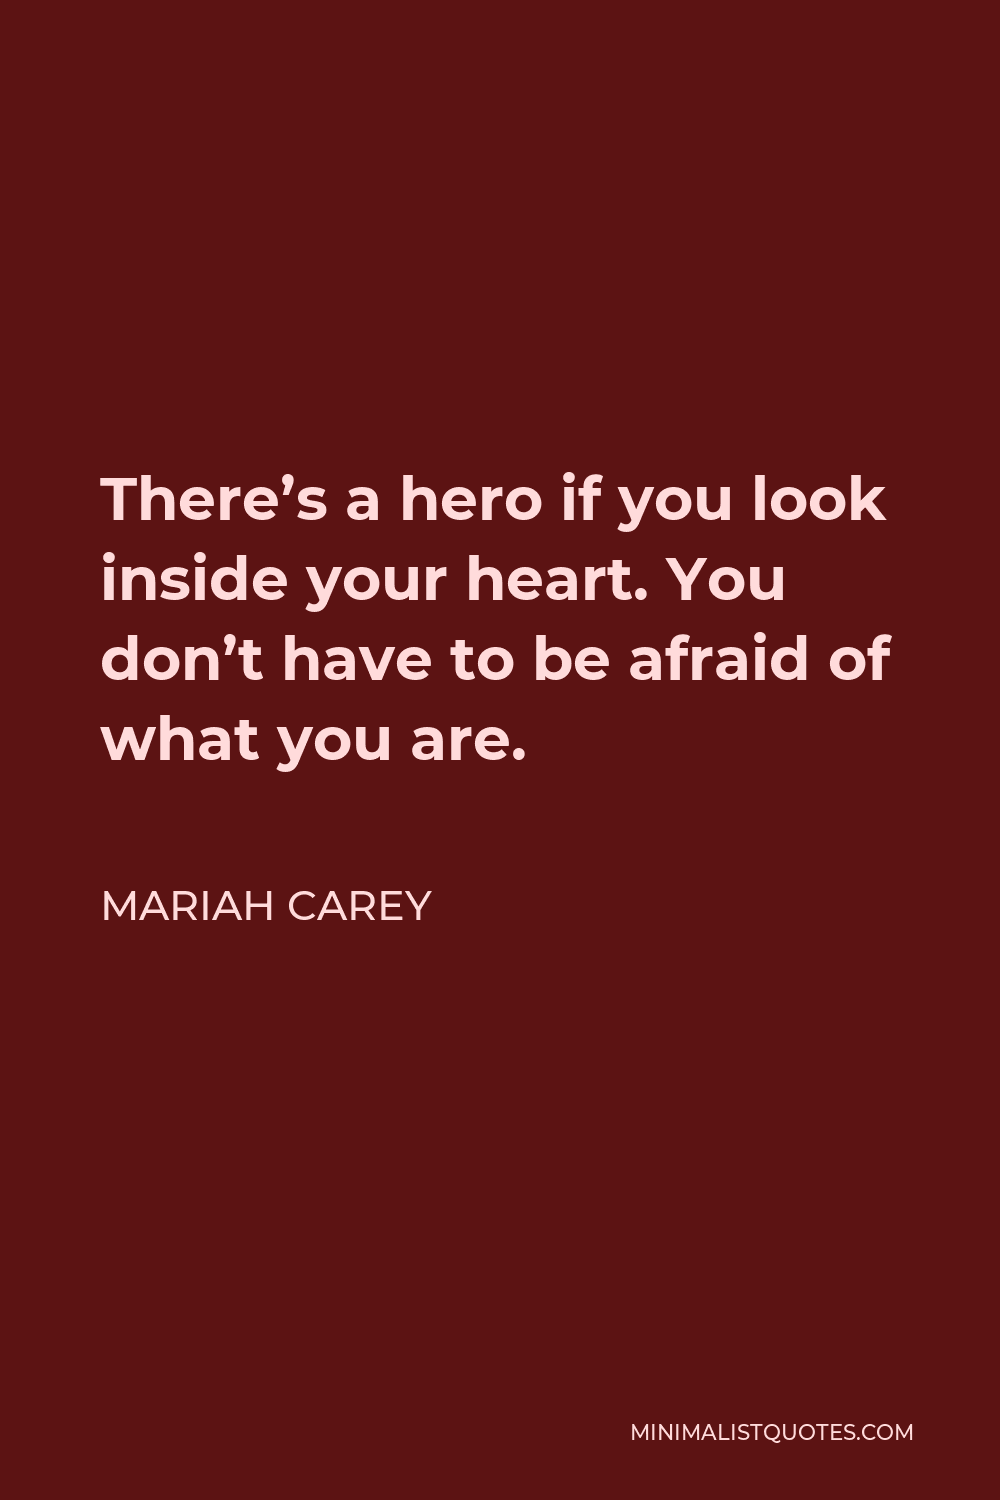 Mariah Carey Quote - There’s a hero, If you look inside your heart.